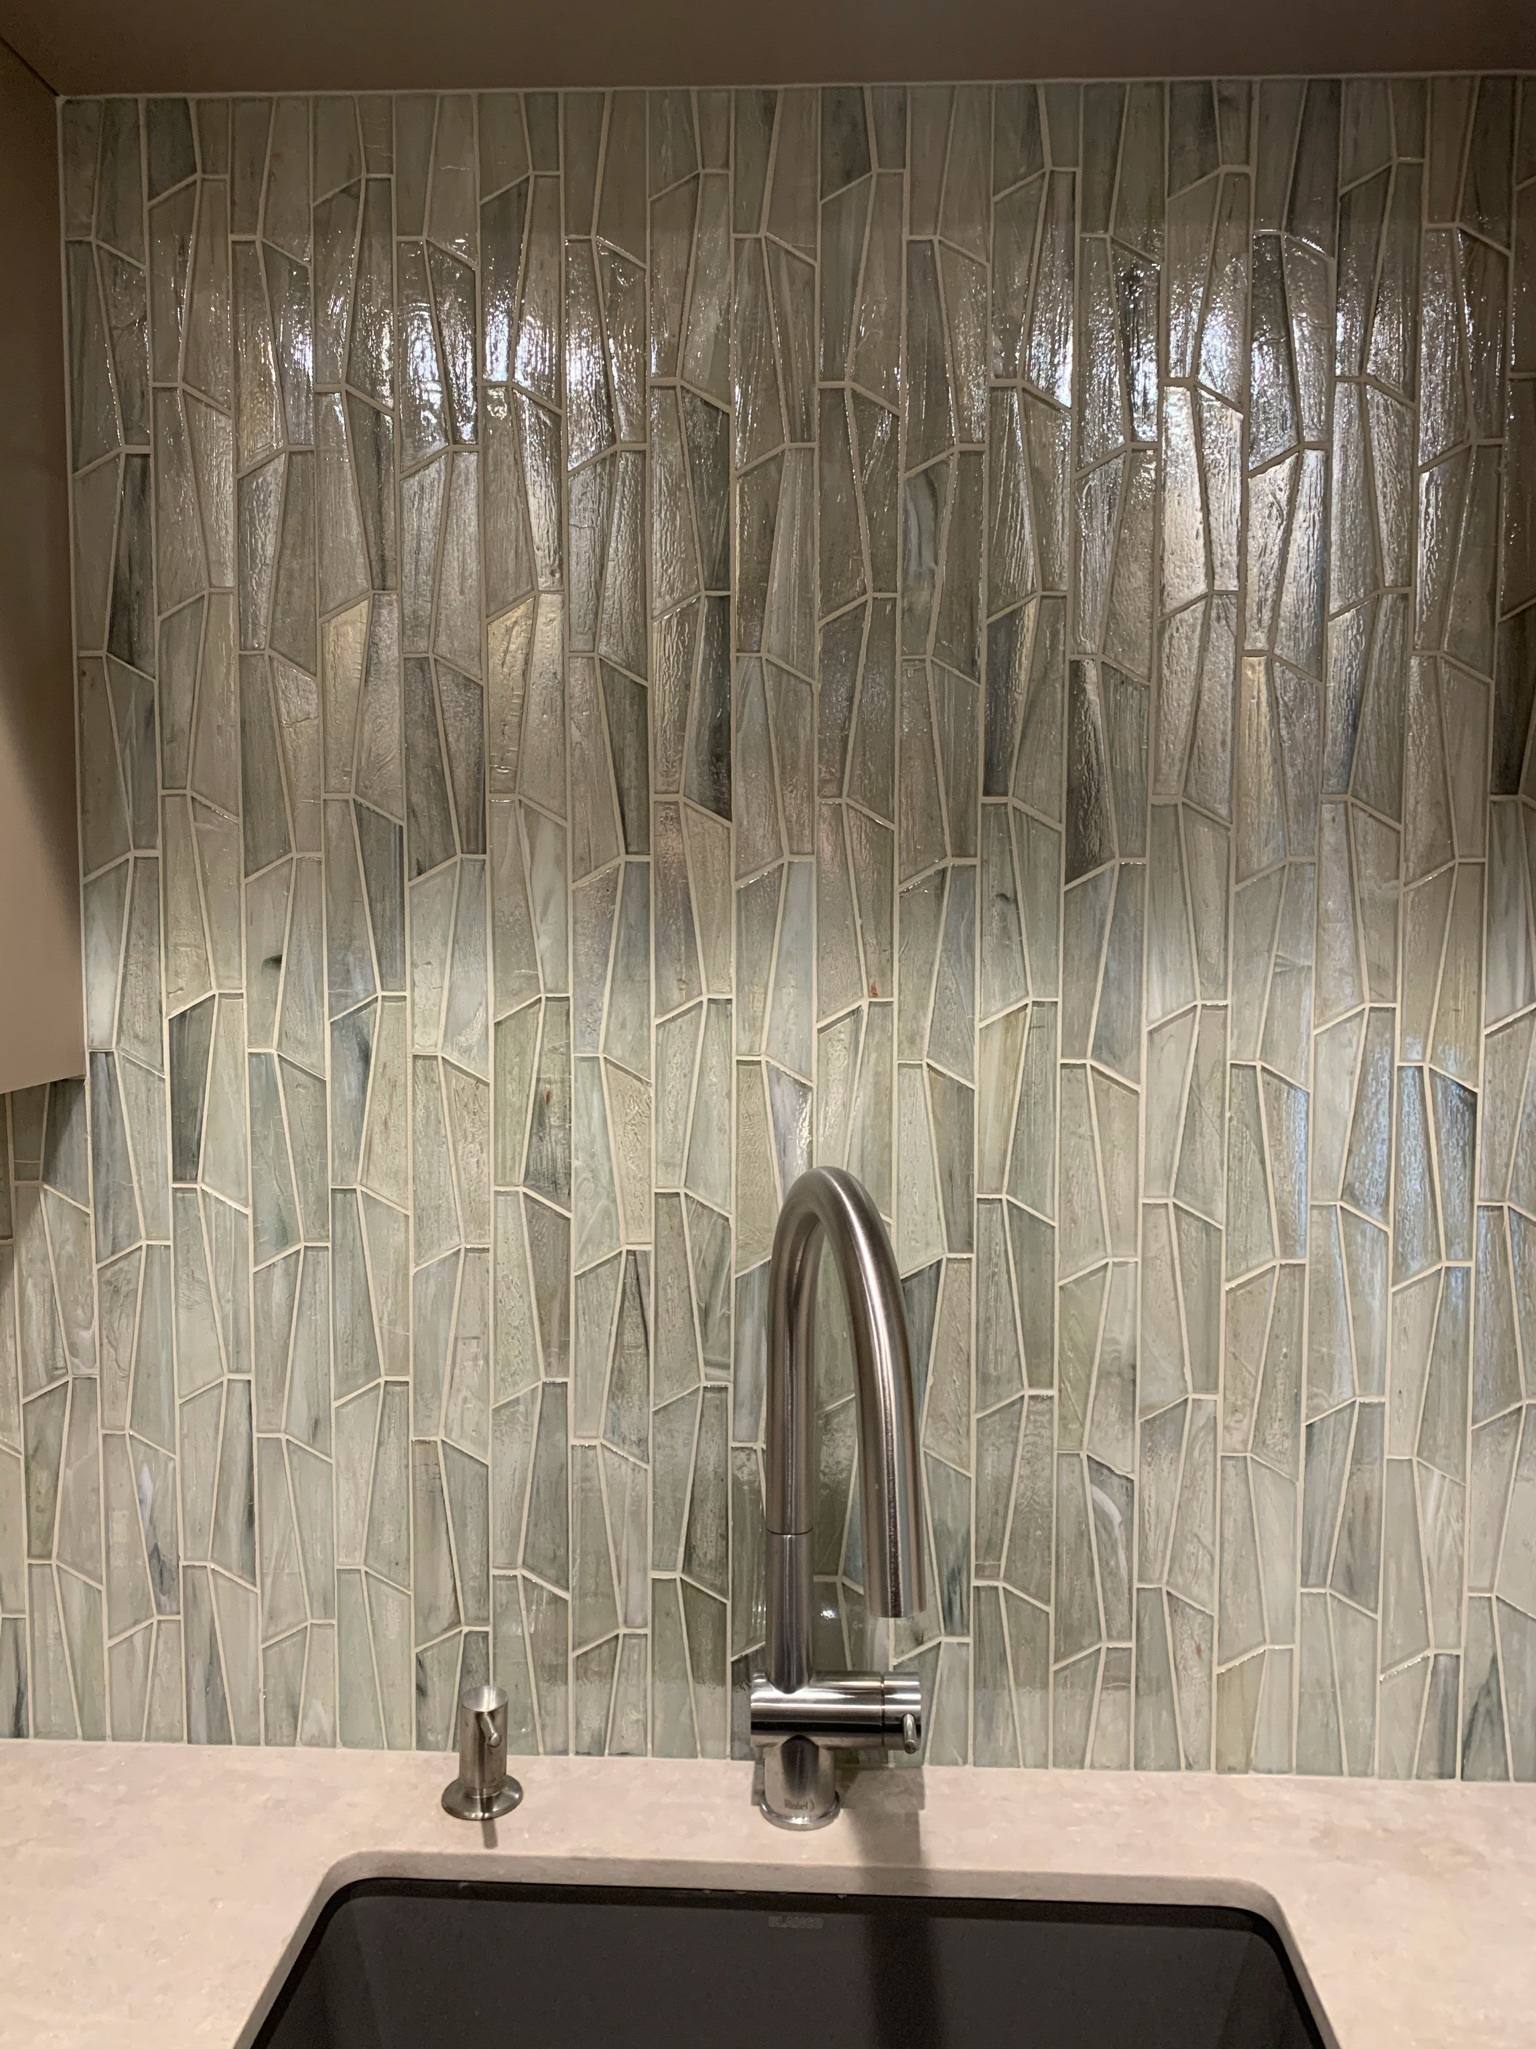 This backsplash is very unique. The earth-toned tiles are set in a bamboo pattern.